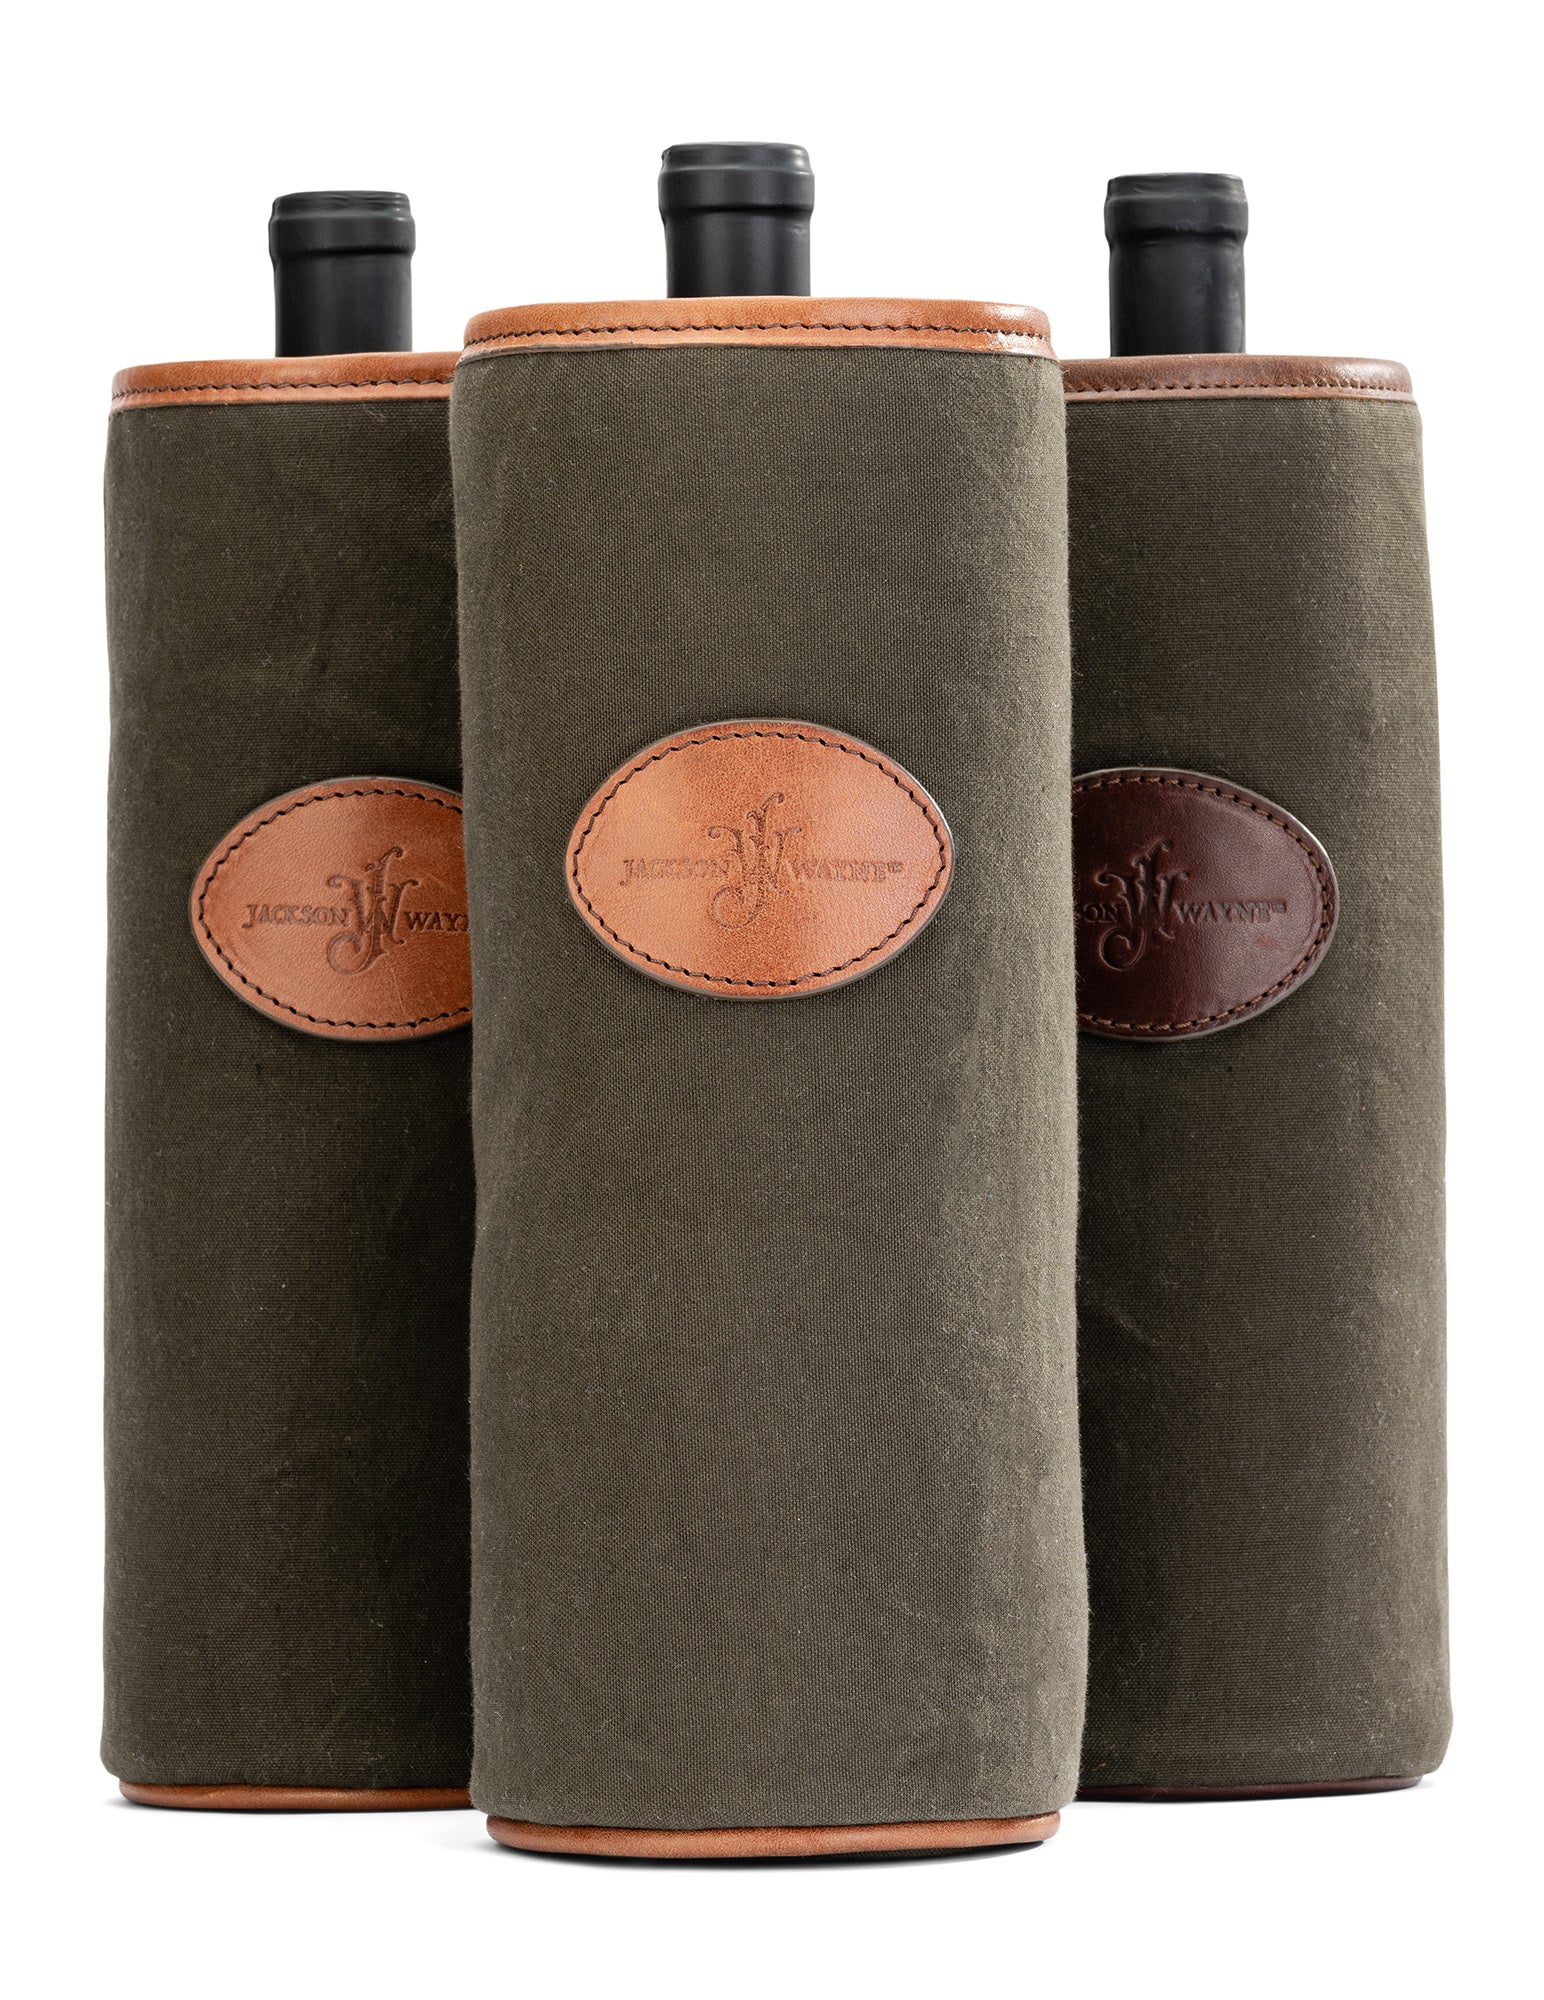 wine & spirit gift bottle holder made of full grain leather and canvas by Jackson Wayne